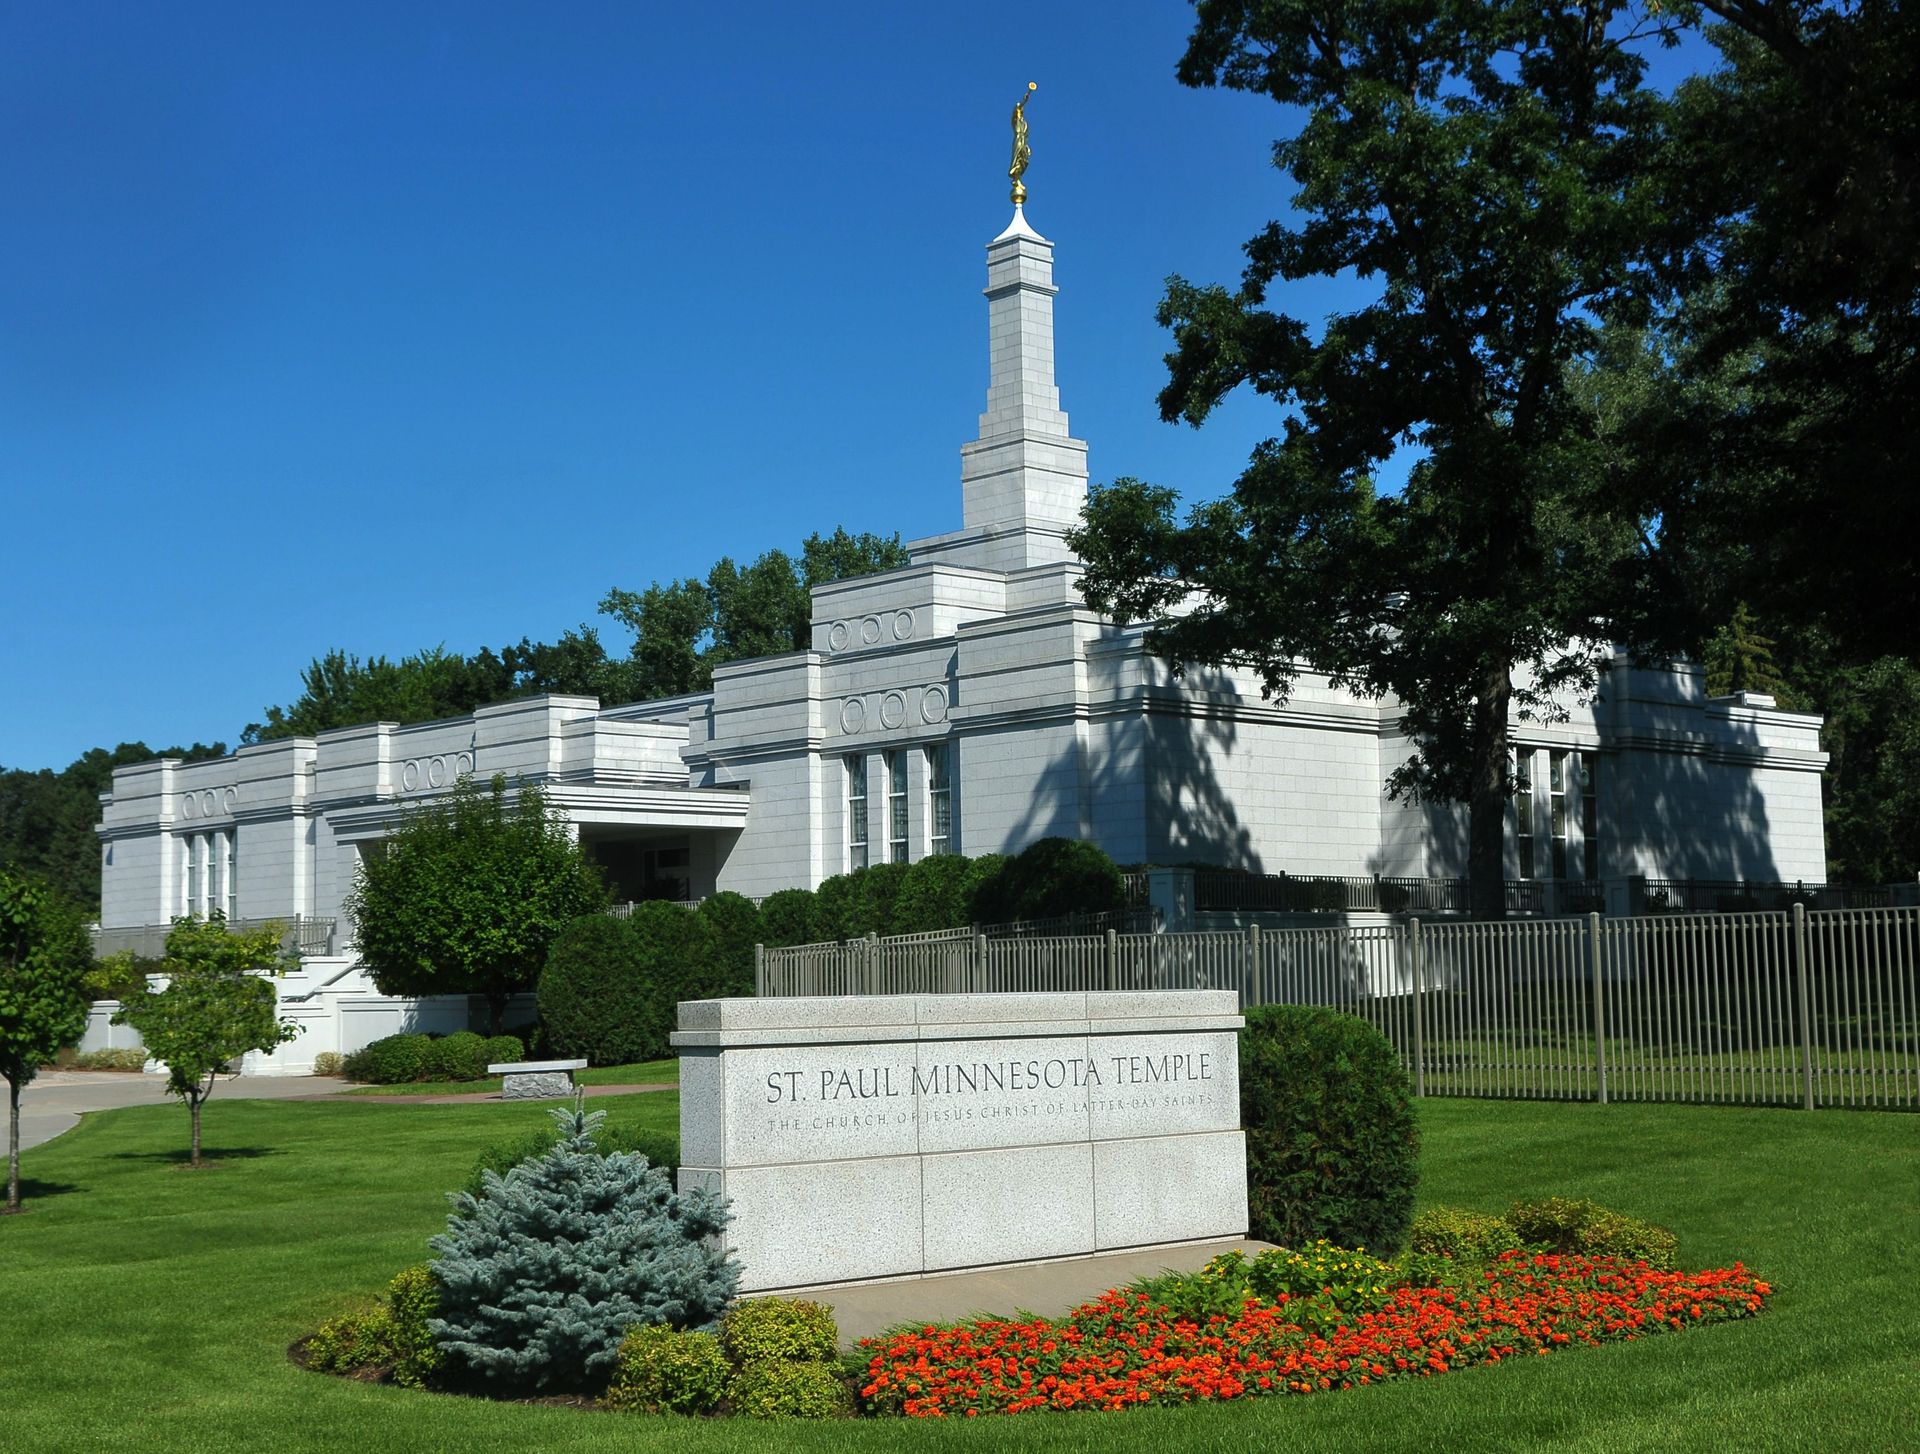 The St. Paul Minnesota Temple, including the name sign, entrance, and scenery.